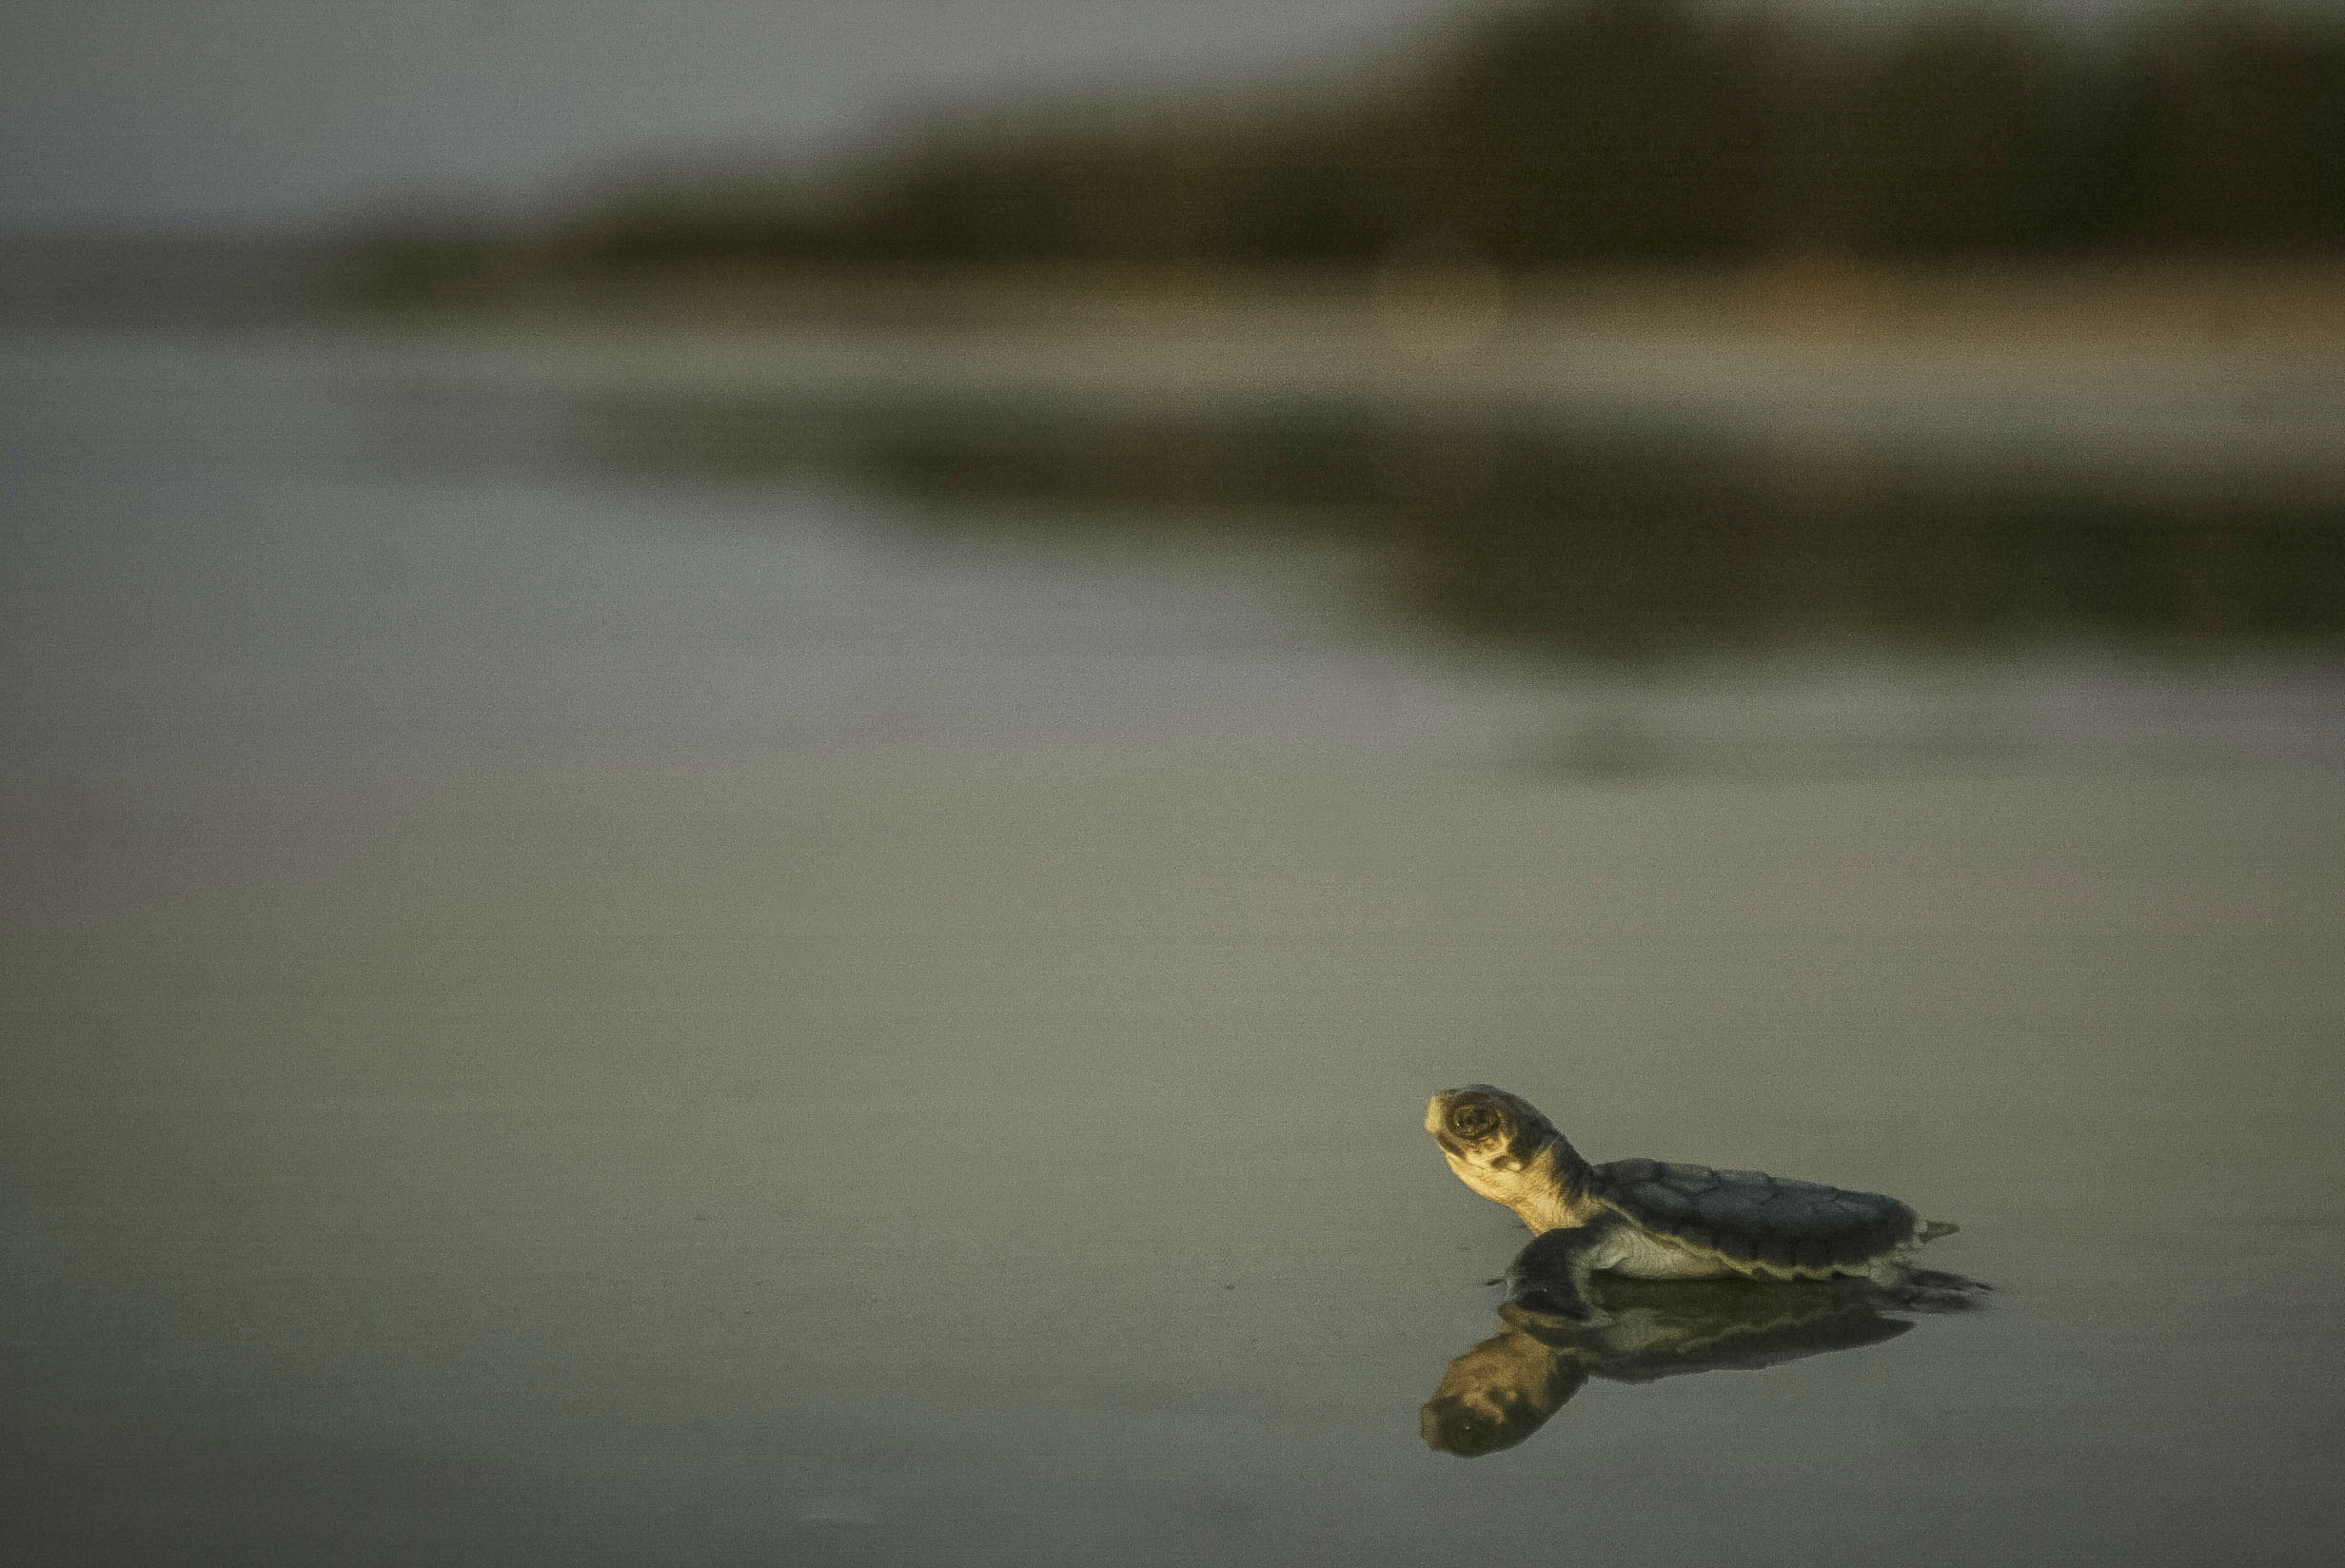 A baby turtle making its way along the beach towards the water.